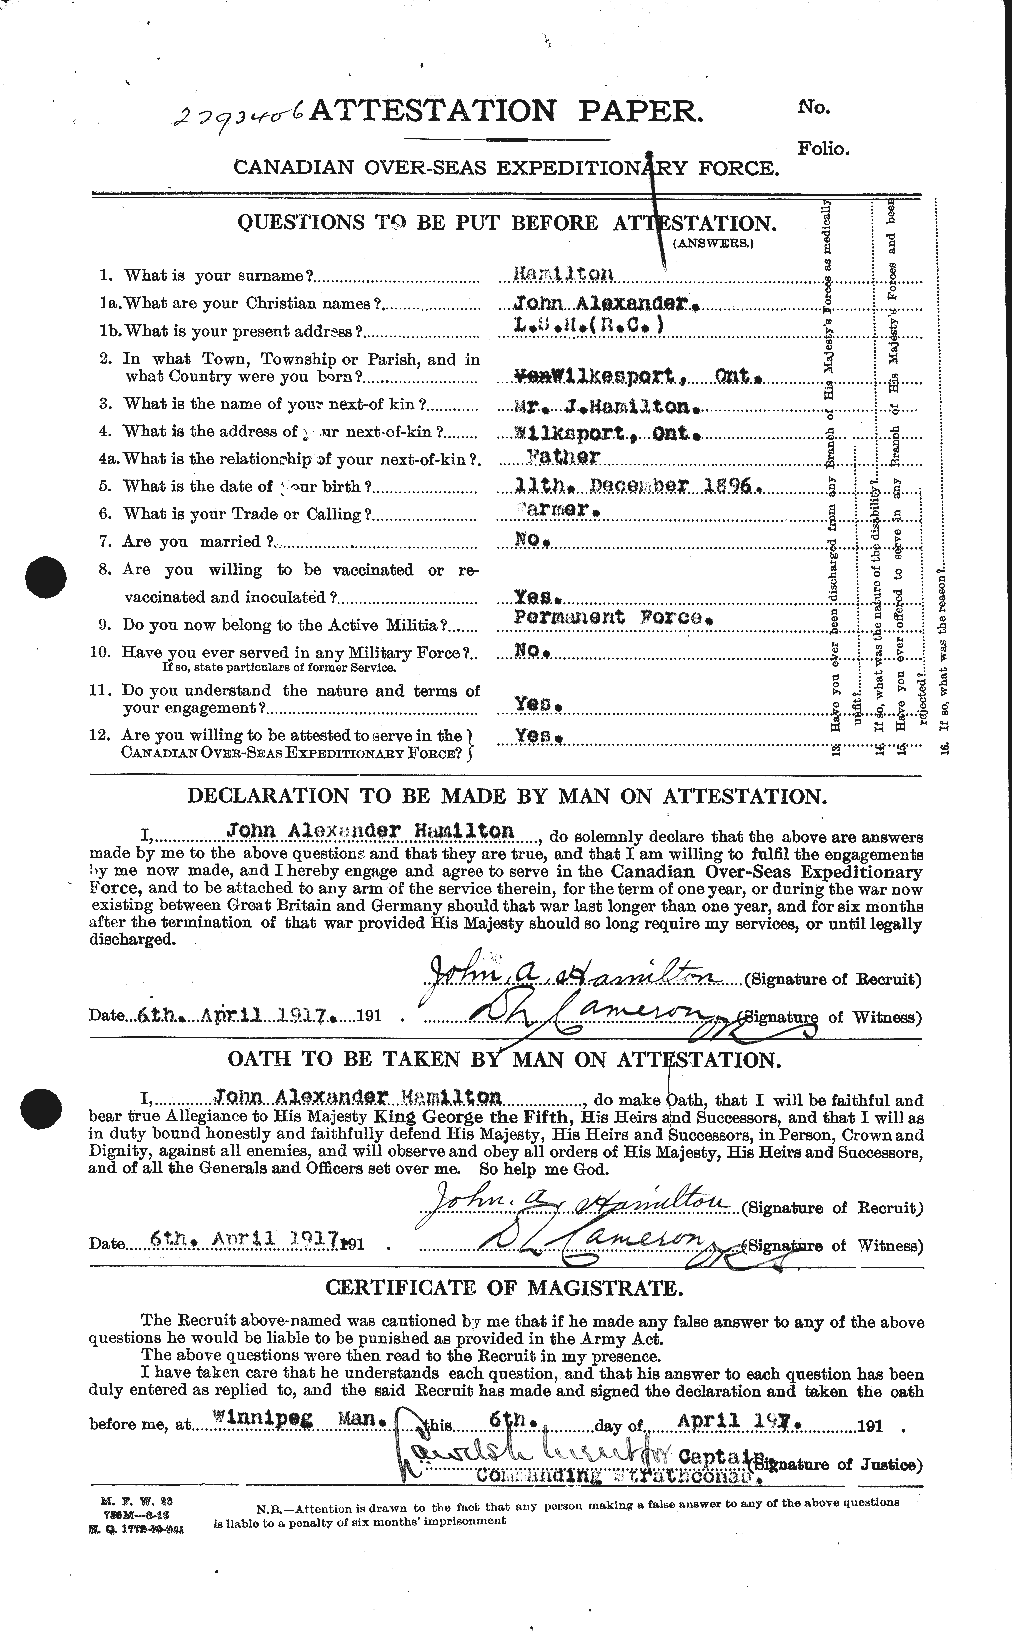 Personnel Records of the First World War - CEF 373065a